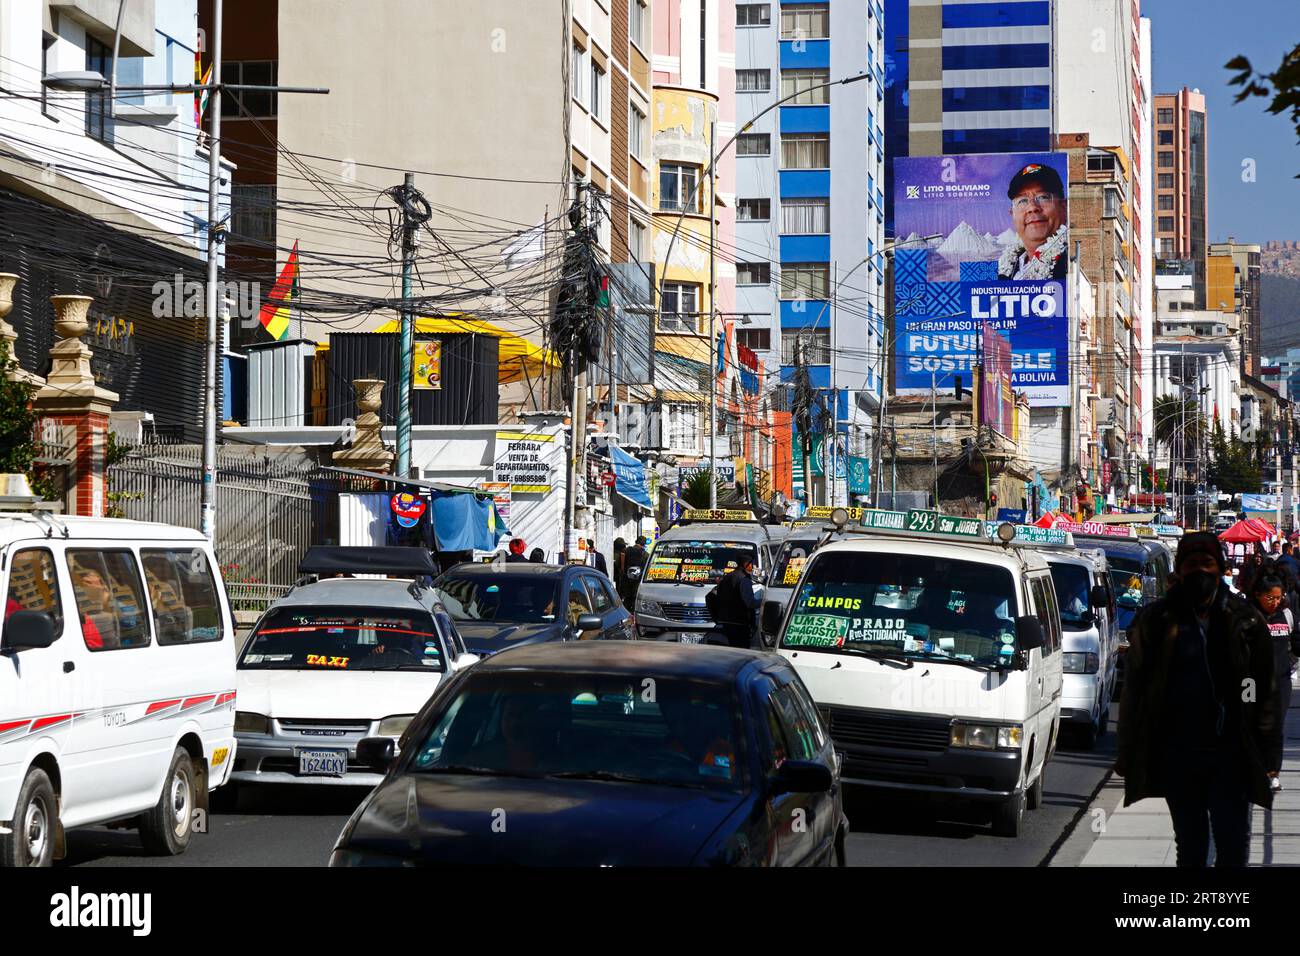 La Paz, BOLIVIA; September 11th 2023: Traffic jams on Av 6 de Agosto in central La Paz, with Bolivian president Luis Arce Catacora on a hoarding promoting the 'Industrialisation of lithium, a big step towards a sustainable future for Bolivia' in the background. Bolivia has some of the world's largest lithium reserves in the Salar de Uyuni salt flat, the development of which is central to the govenrnment's economic policy. This year Bolivia has signed agreements with the Chinese battery maker CATL and the Citic Guoan Group, and Russian state firm Rosatom to develop these resources. Stock Photo